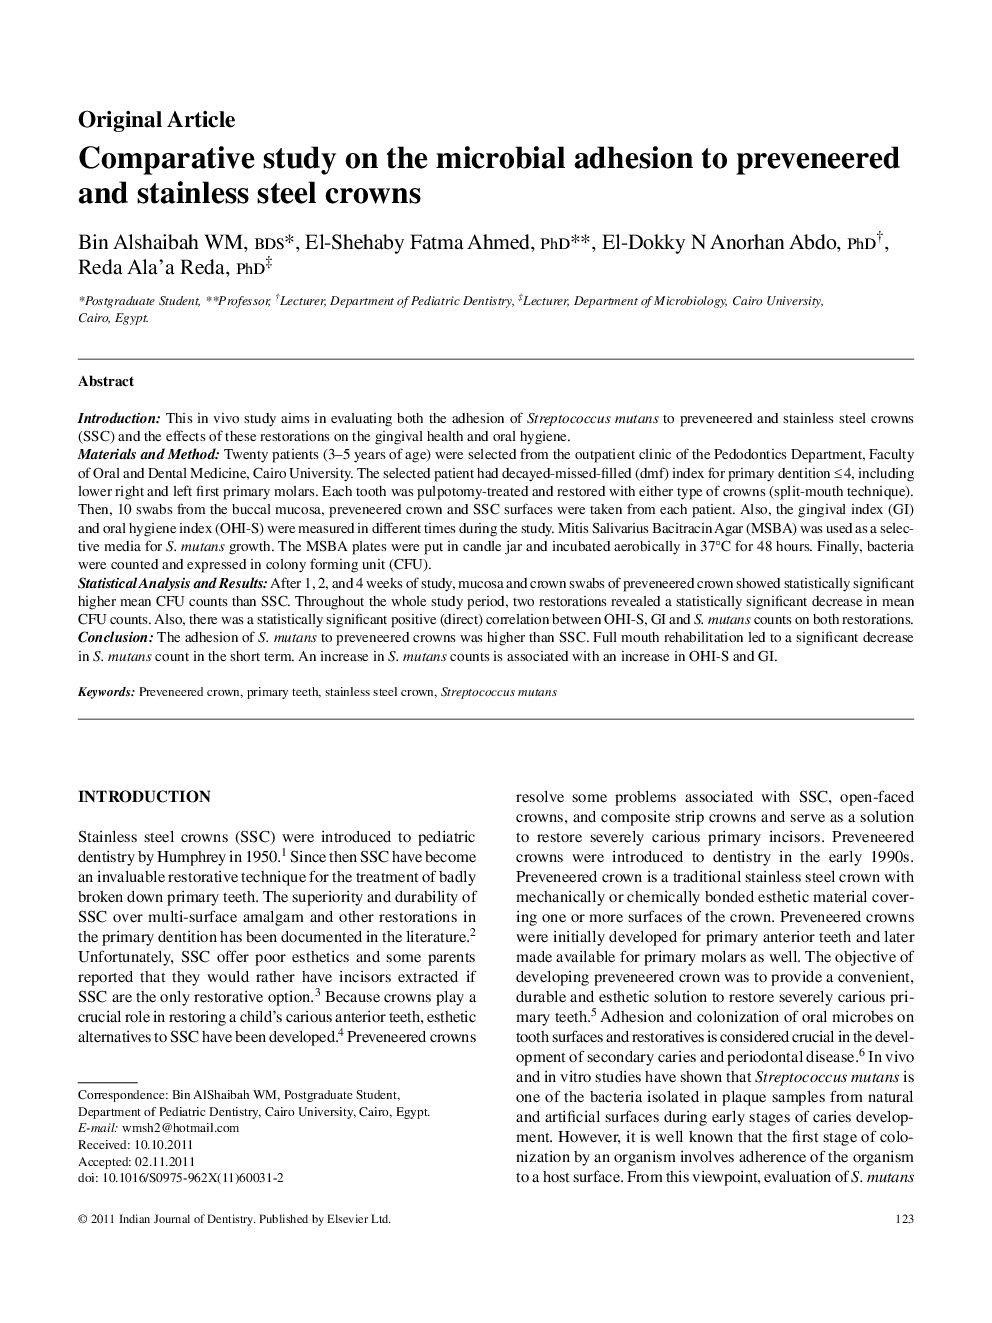 Comparative study on the microbial adhesion to preveneered and stainless steel crowns